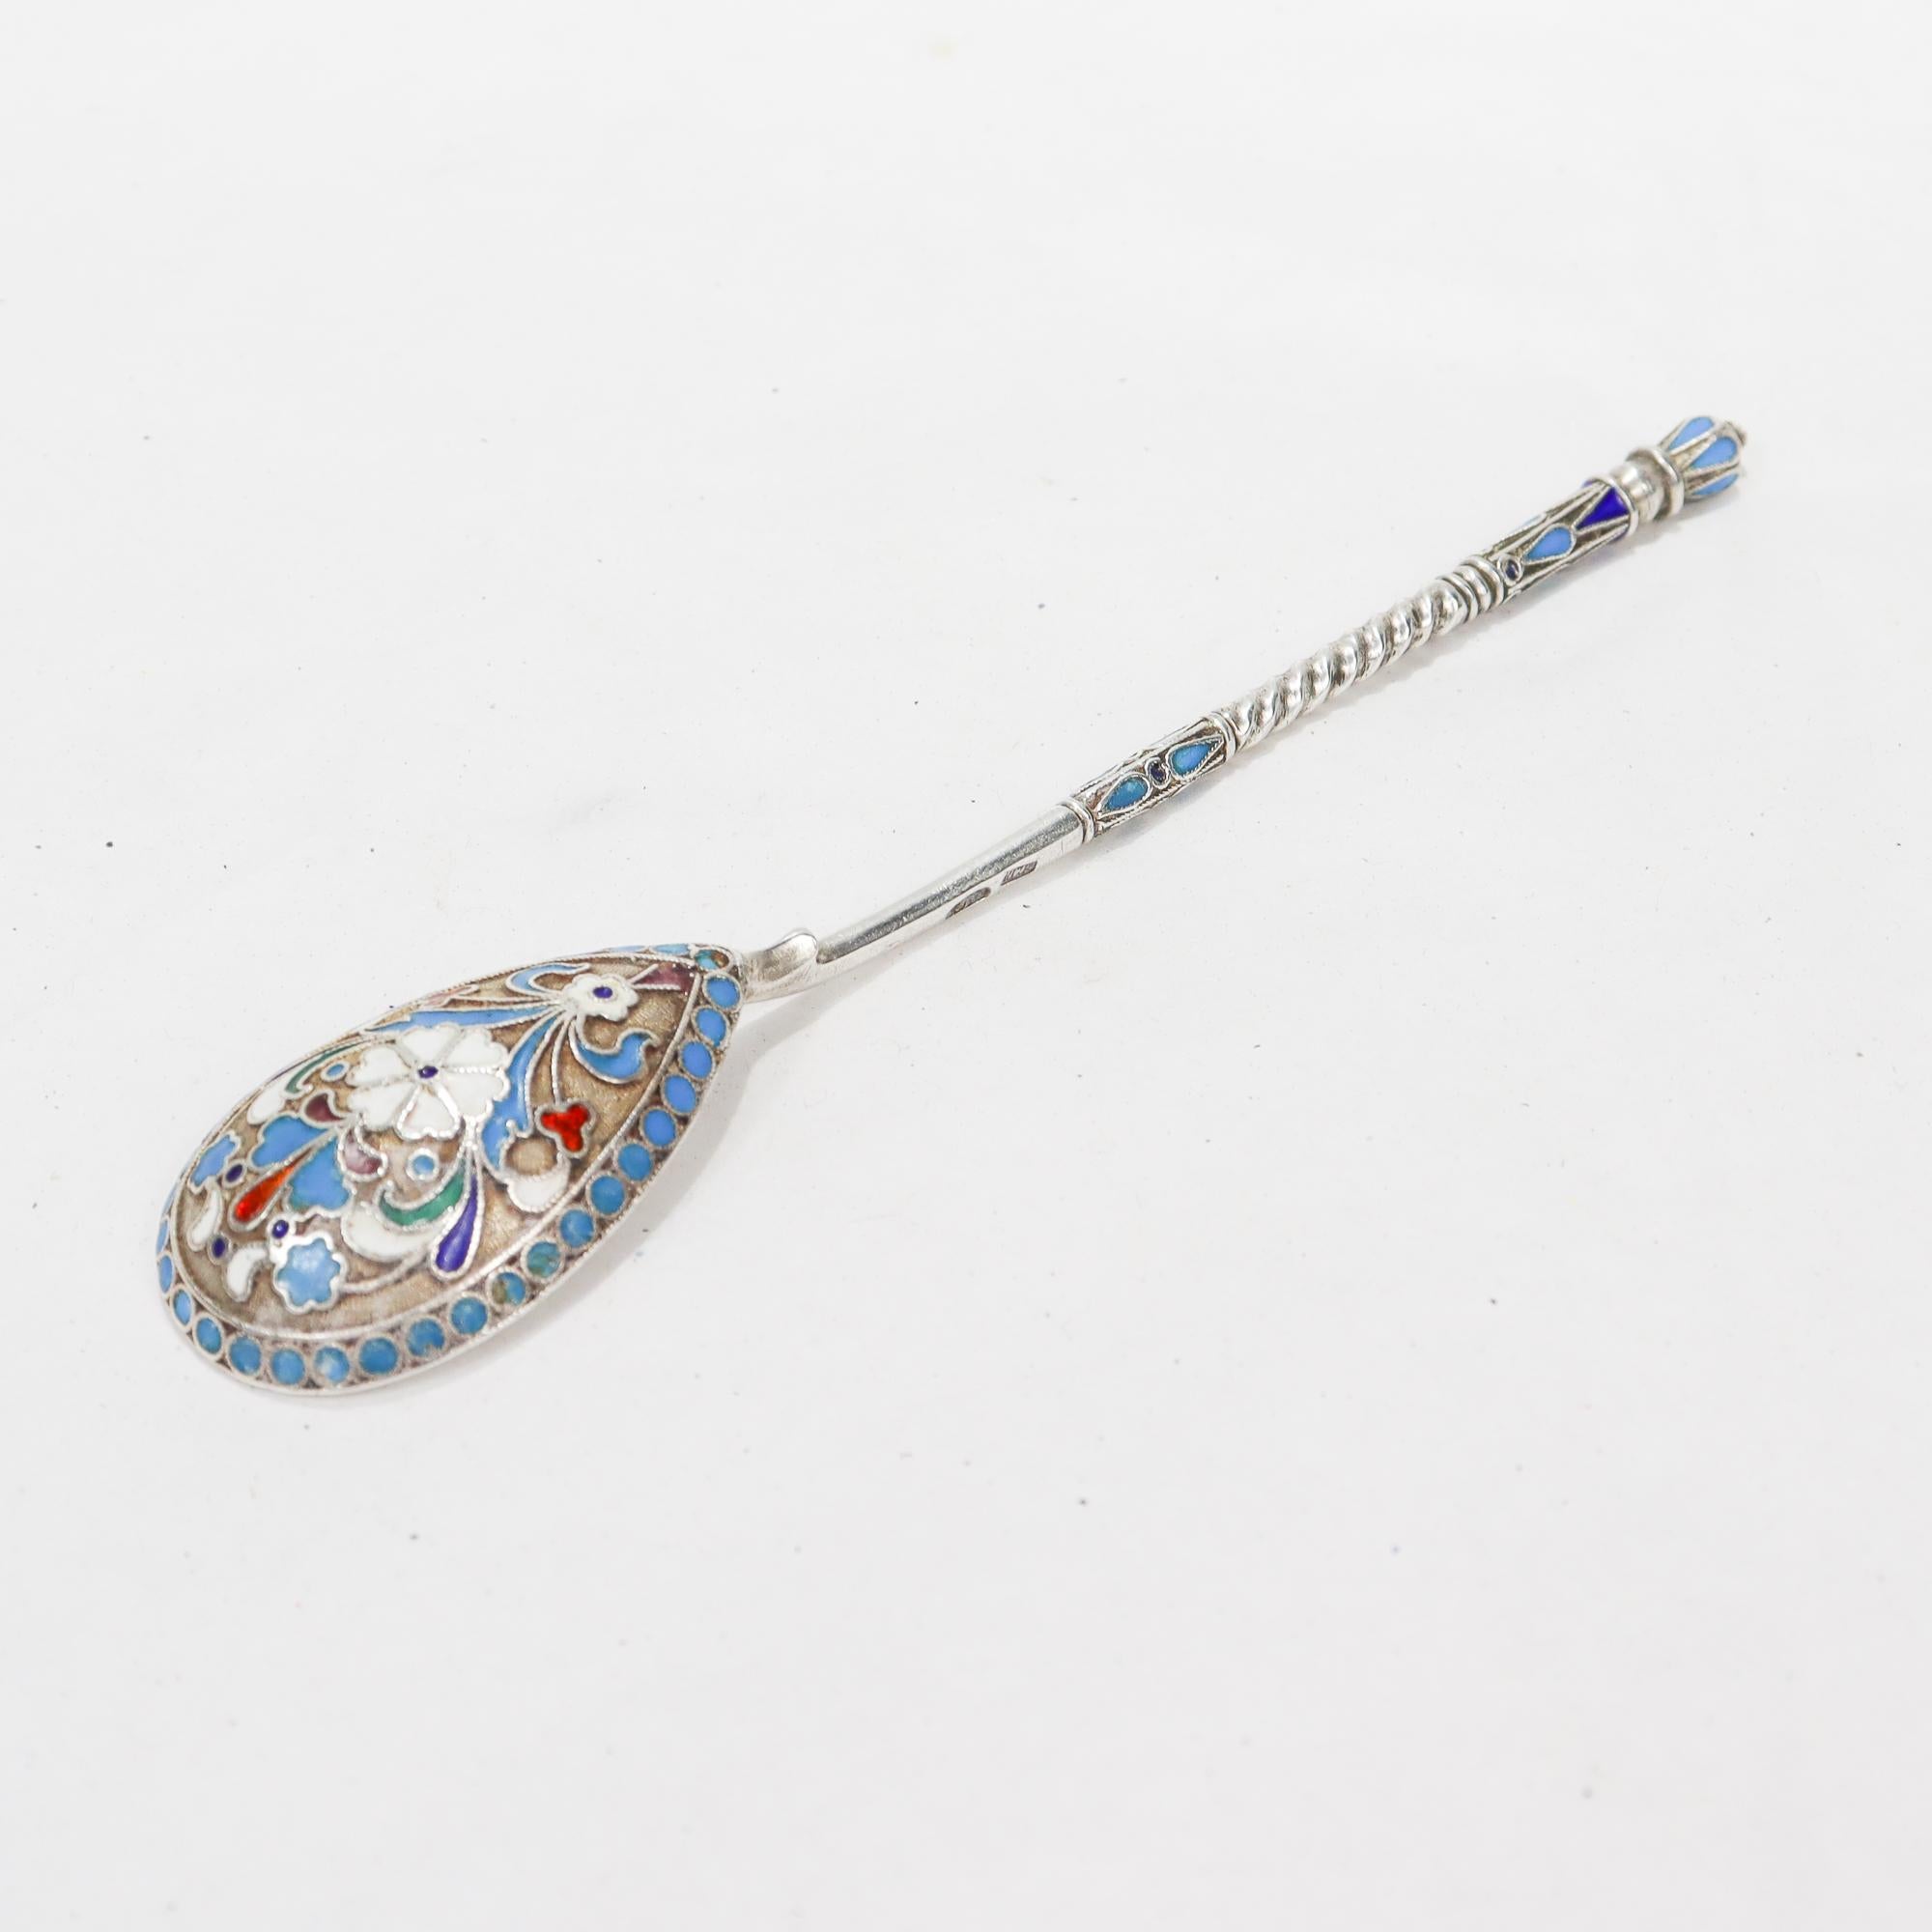 imperial silver spoon